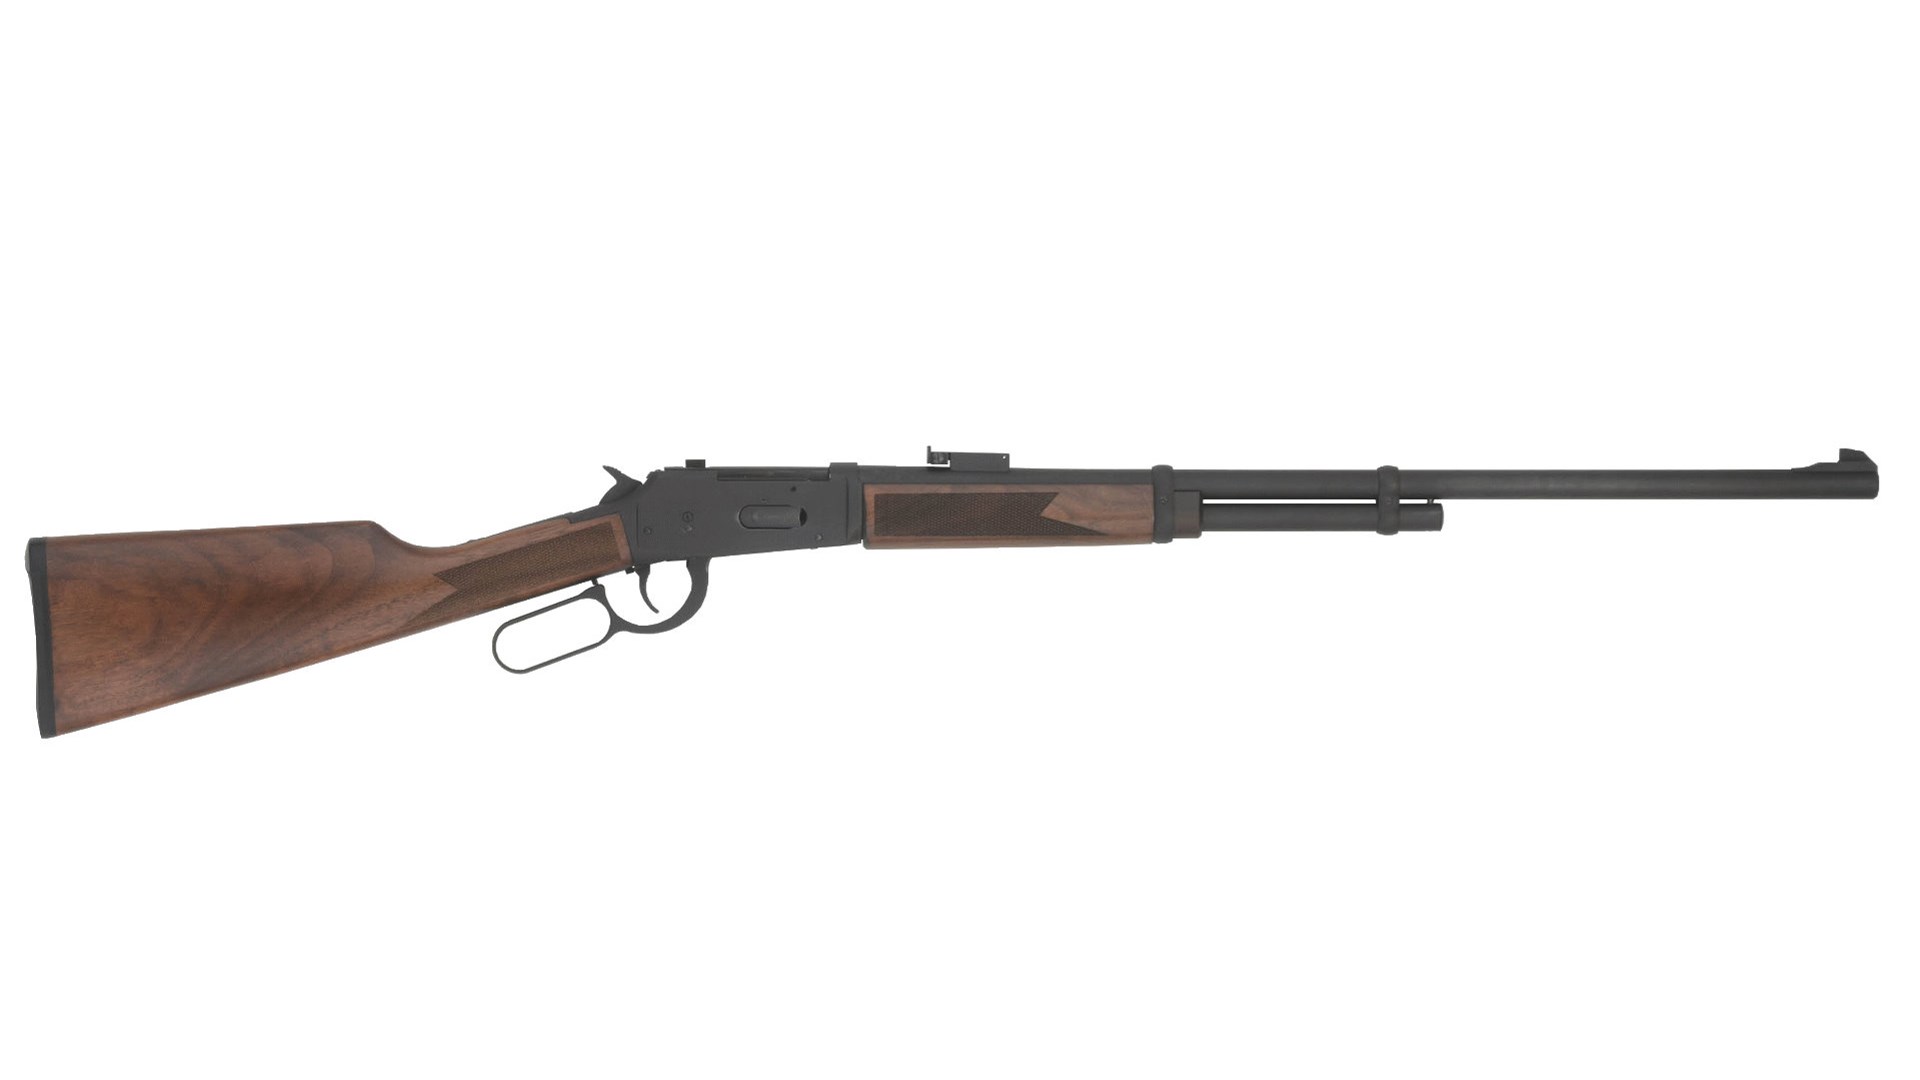 The right side of a TriStar Arms LR94 lever-action shotgun featuring a blued metal finish.